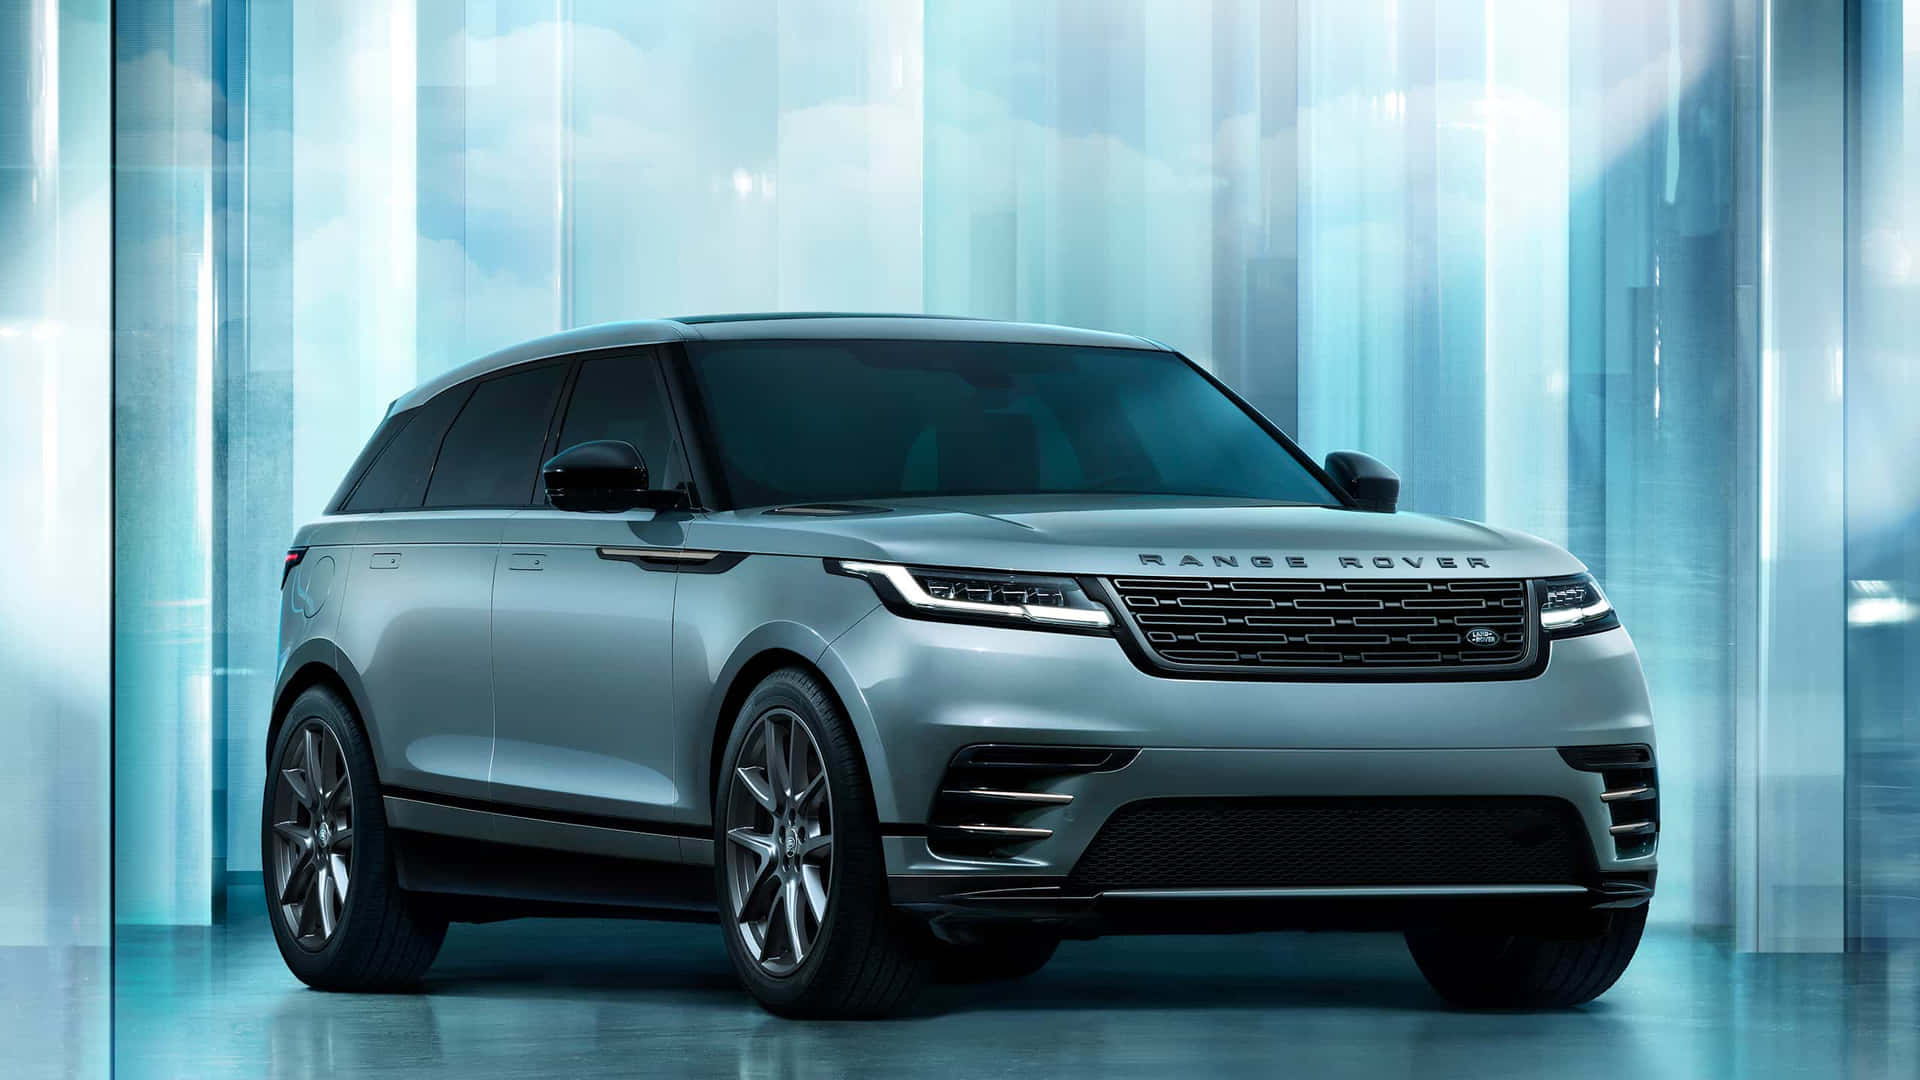 The New Range Rover Vogue Is Shown In A Dark Room